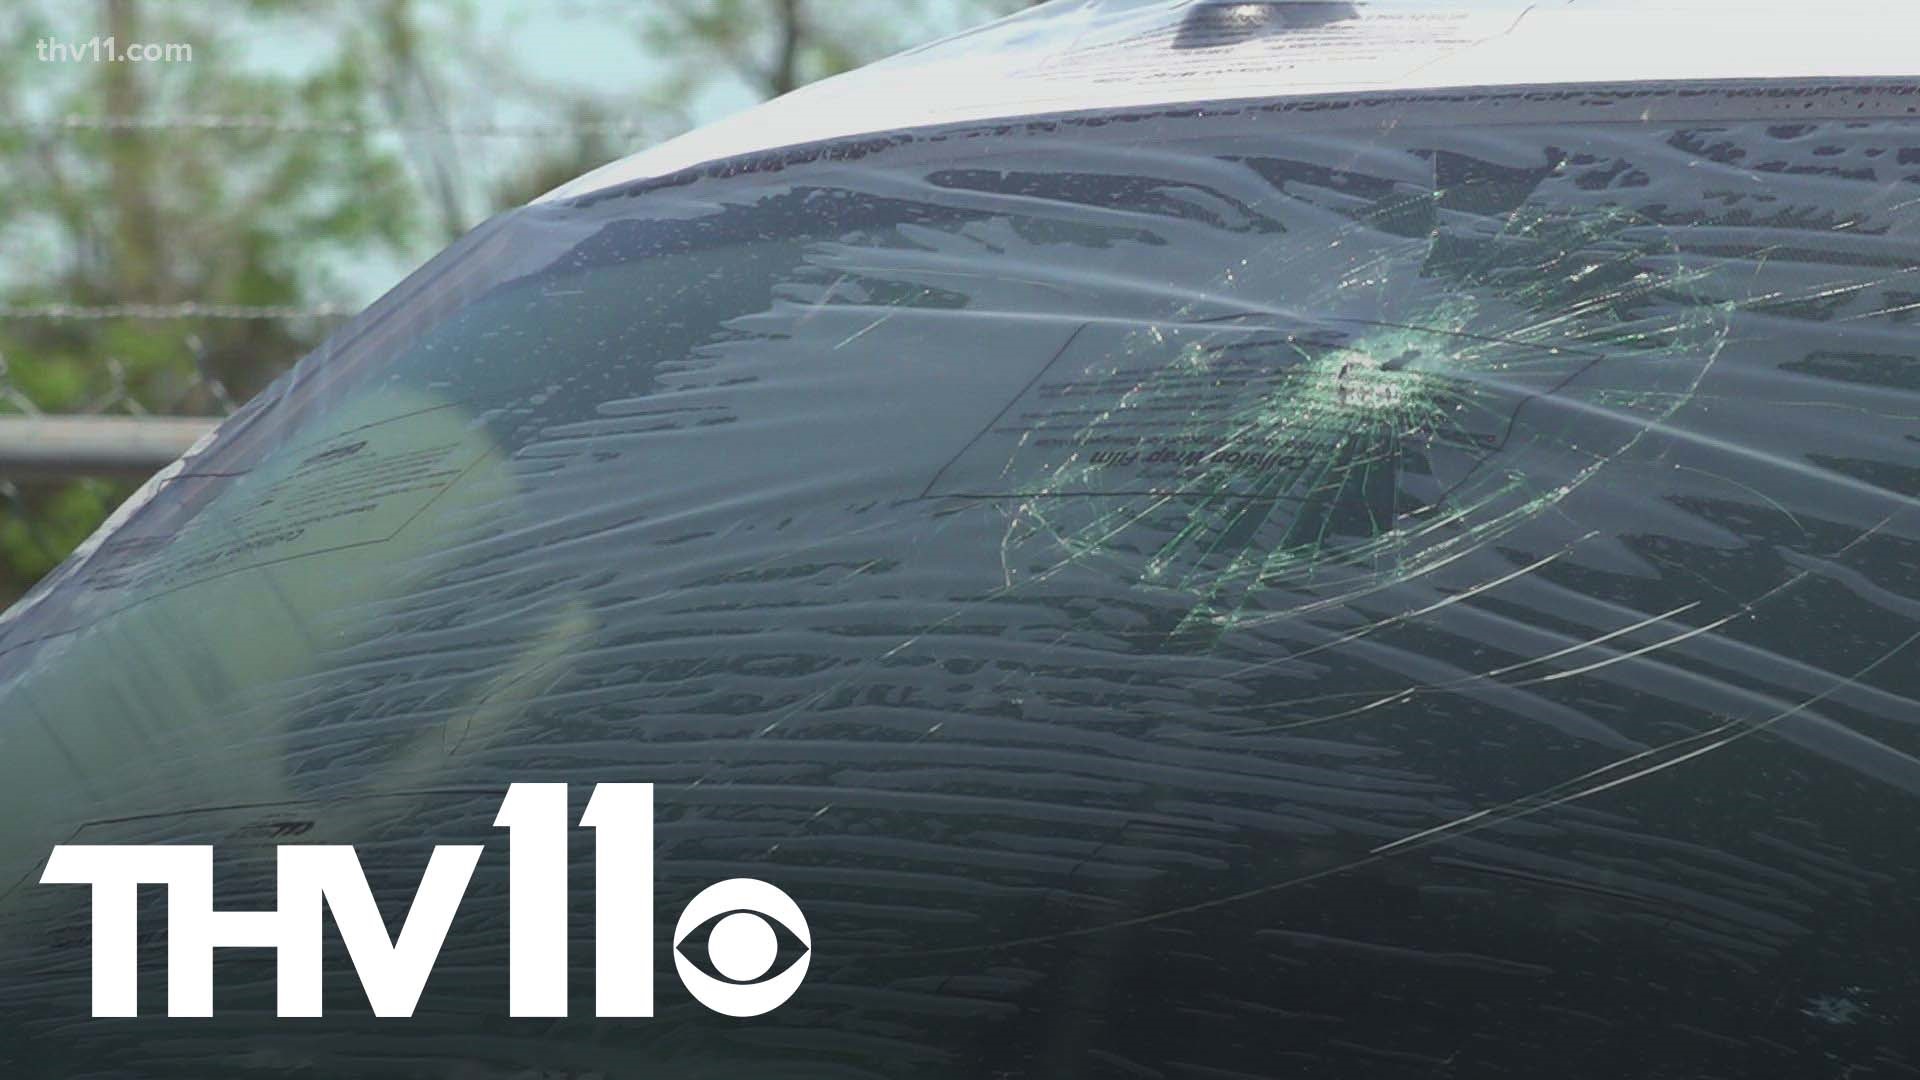 Many Arkansans are still dealing with the aftermath of this week's storm. Hail damage caused problems for many and auto shops are seeing a rush as a result.